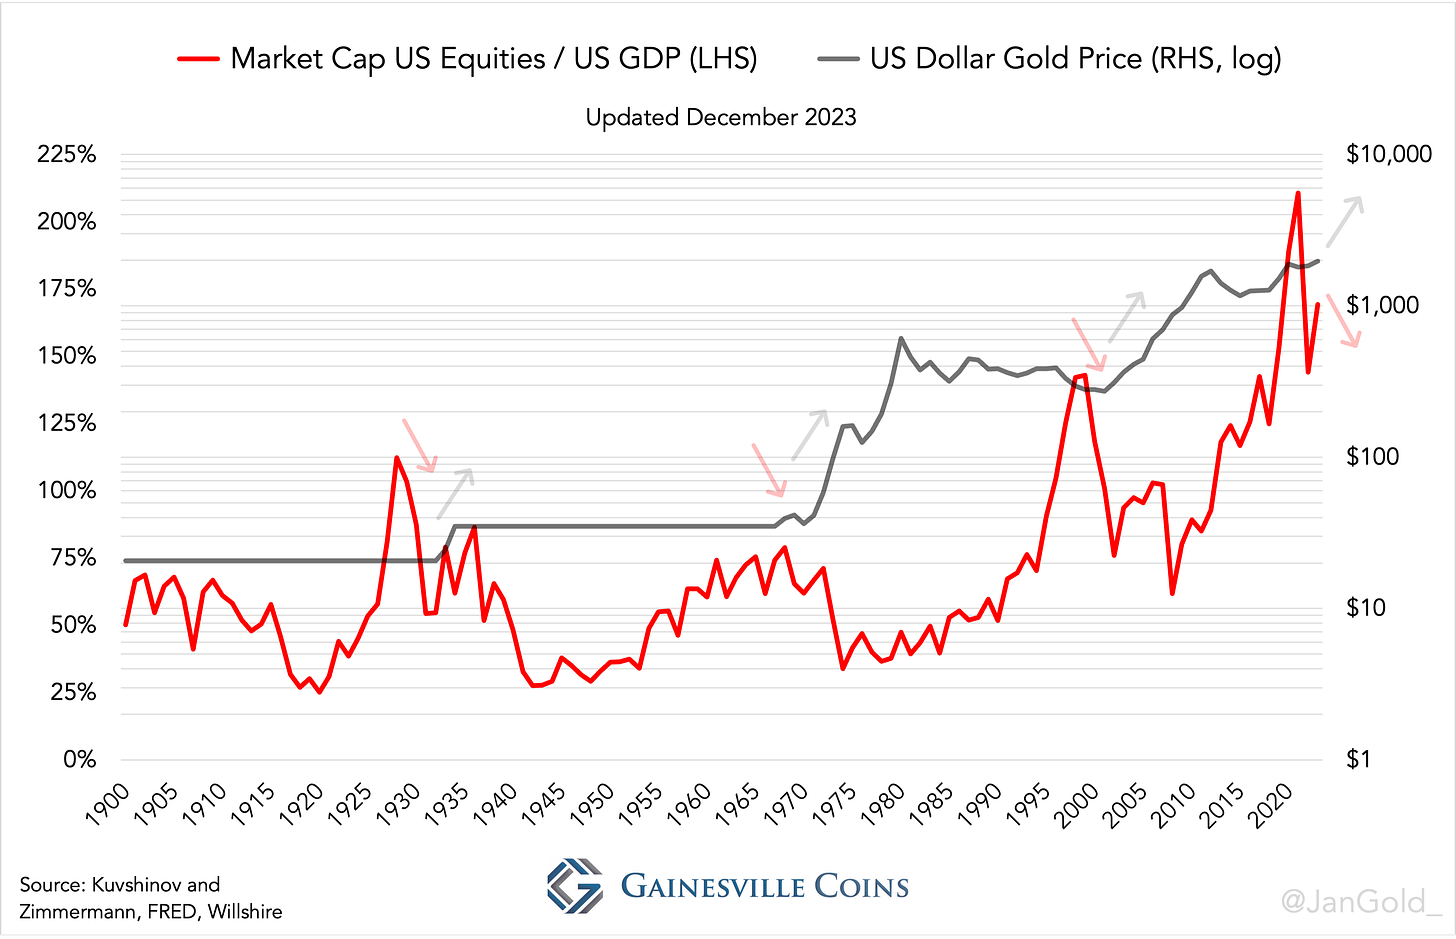 US equity market cap to GDP and gold price